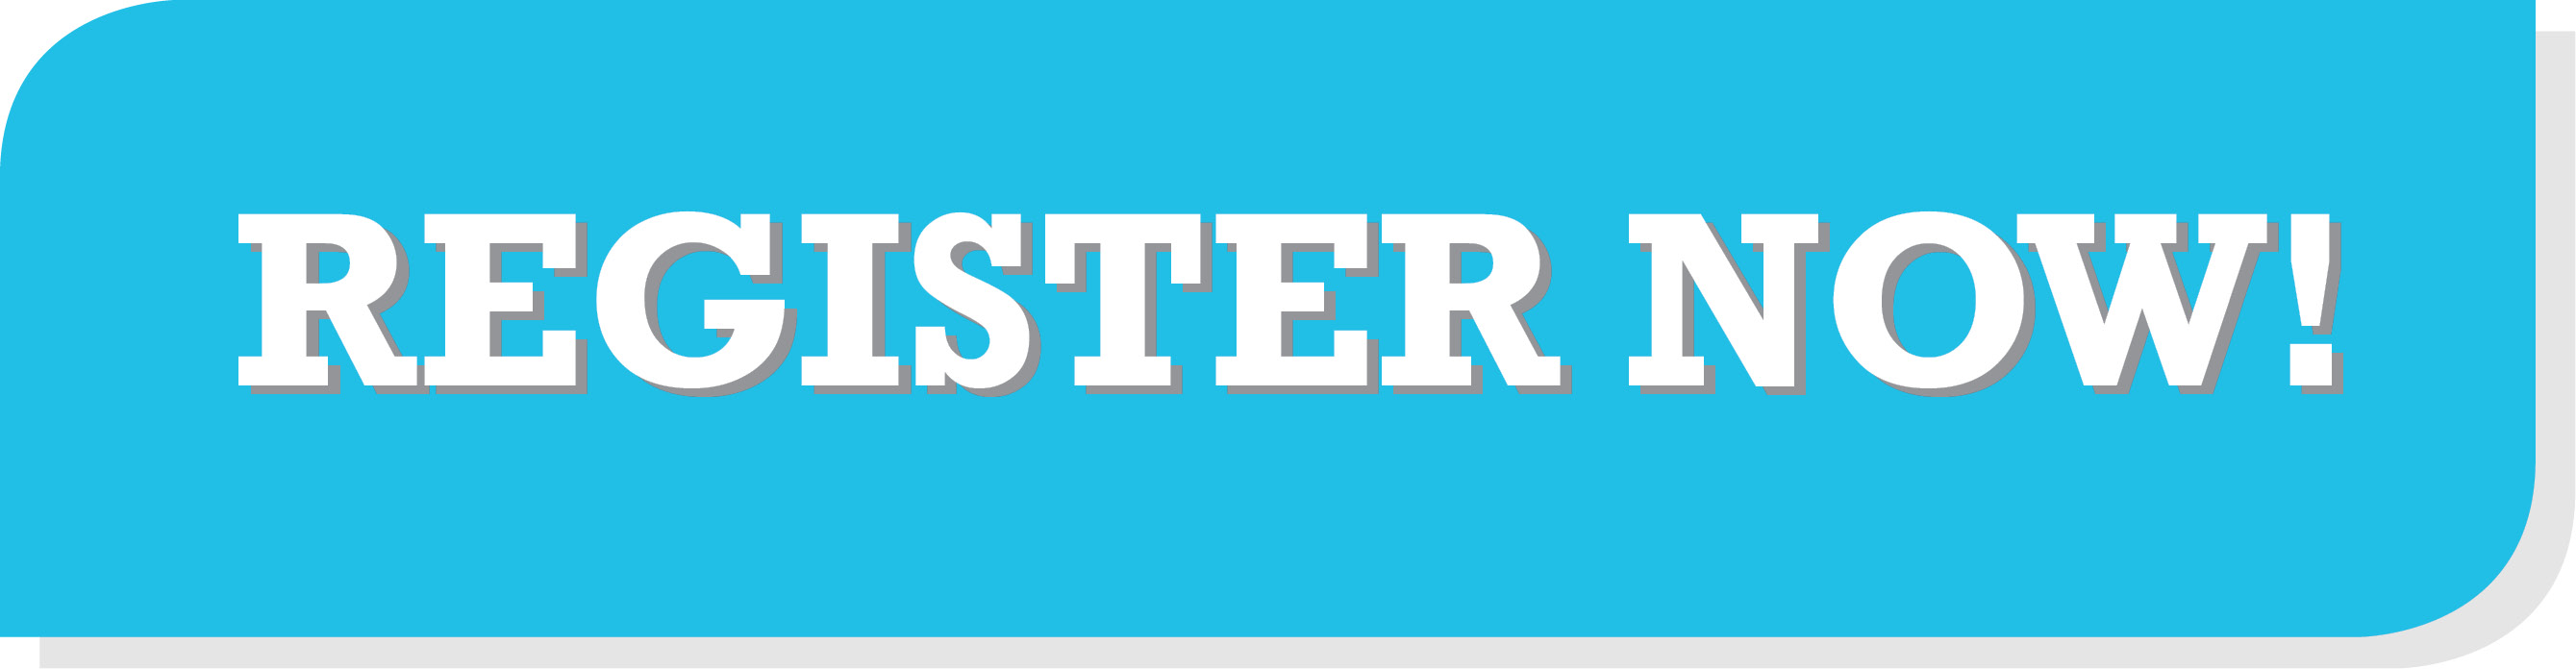 register now in white text on a light blue background